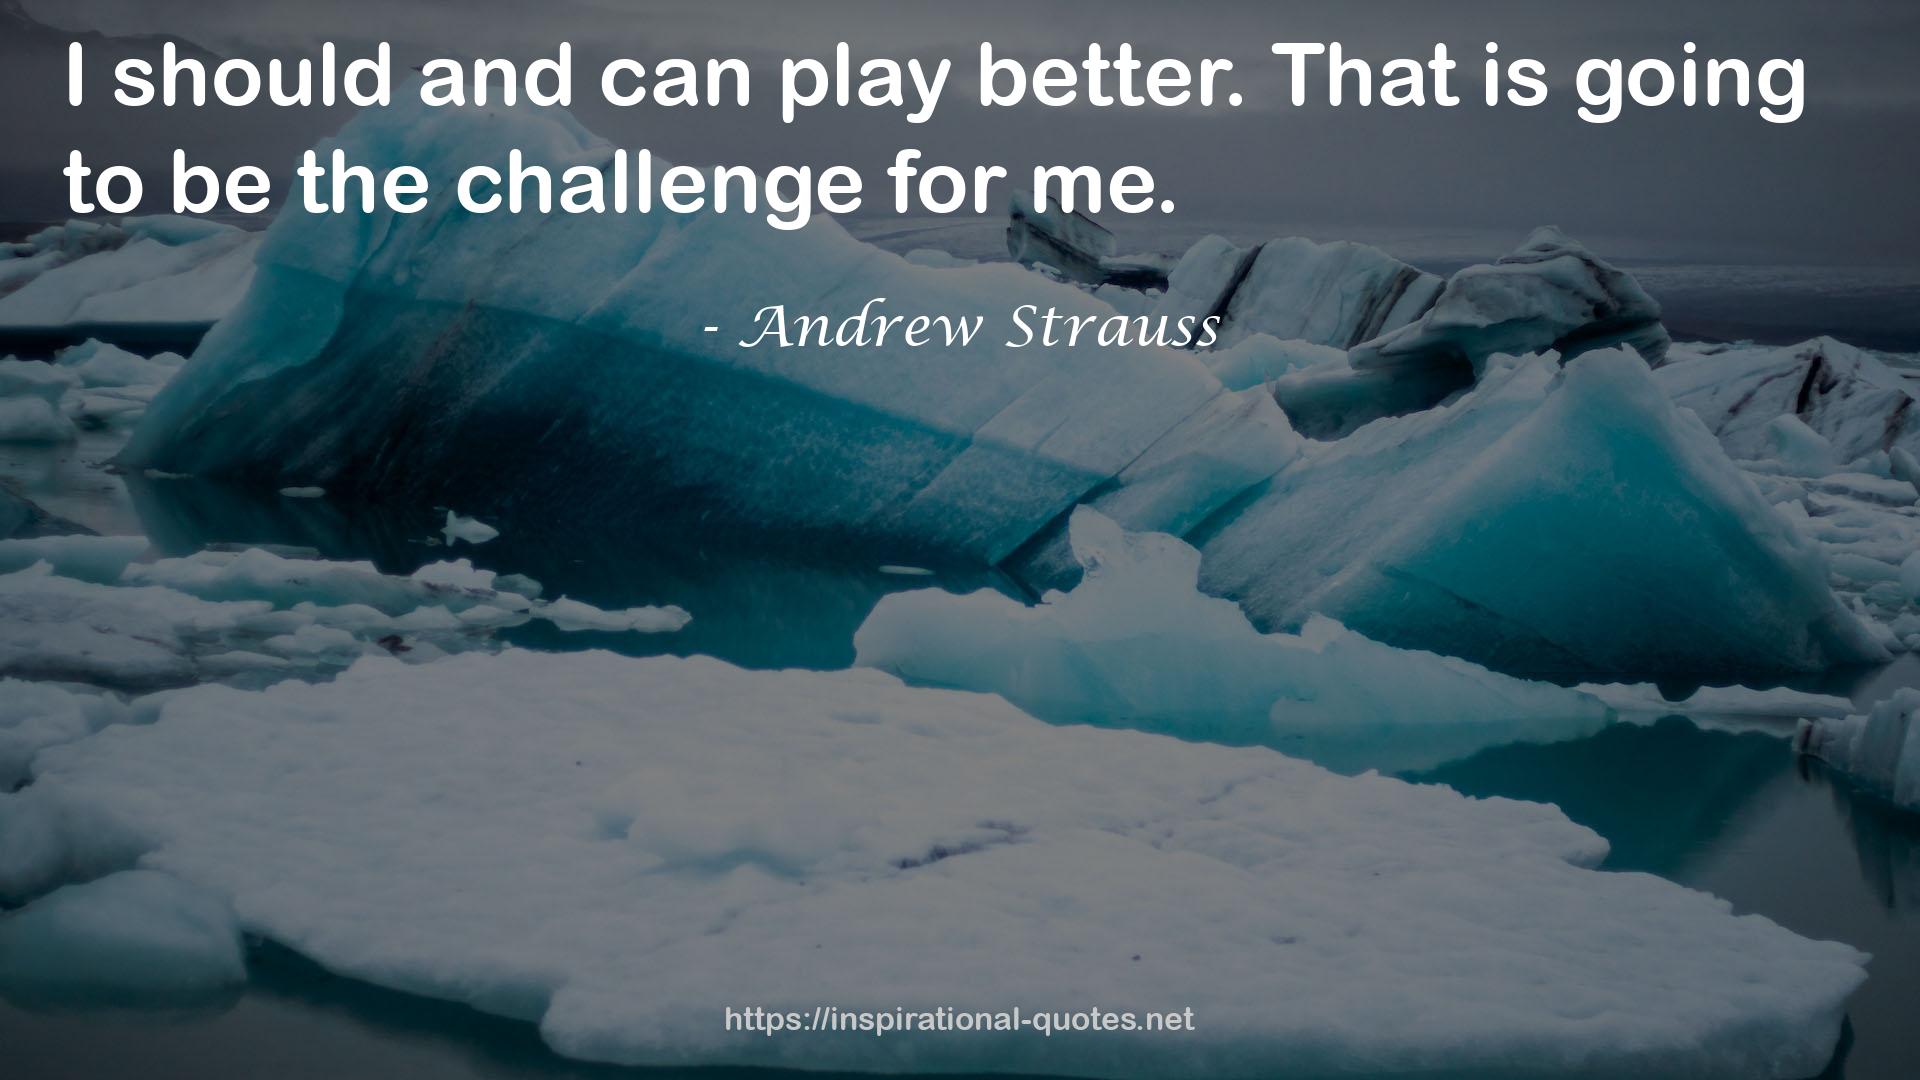 Andrew Strauss QUOTES